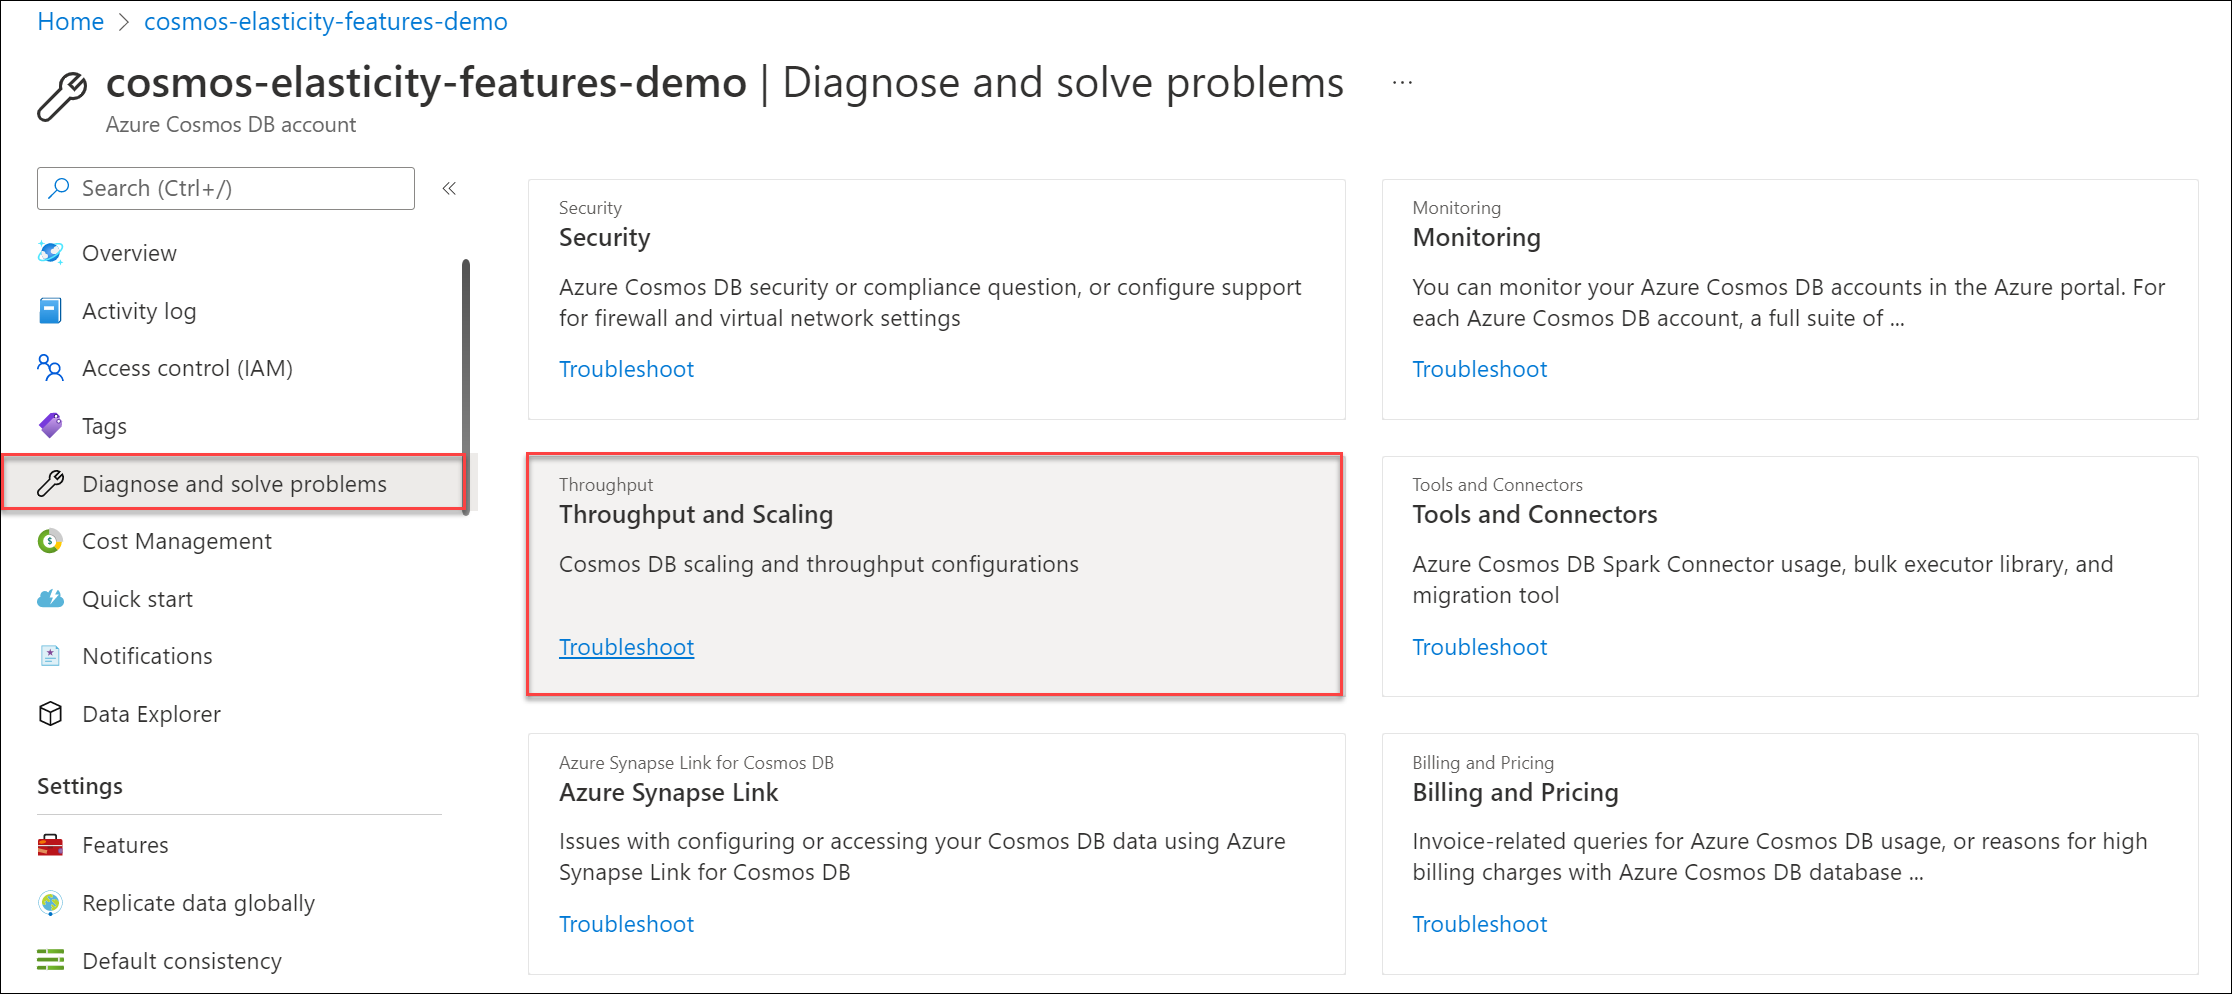 Screenshot of Throughput and Scaling topic in Diagnose and solve issues page.